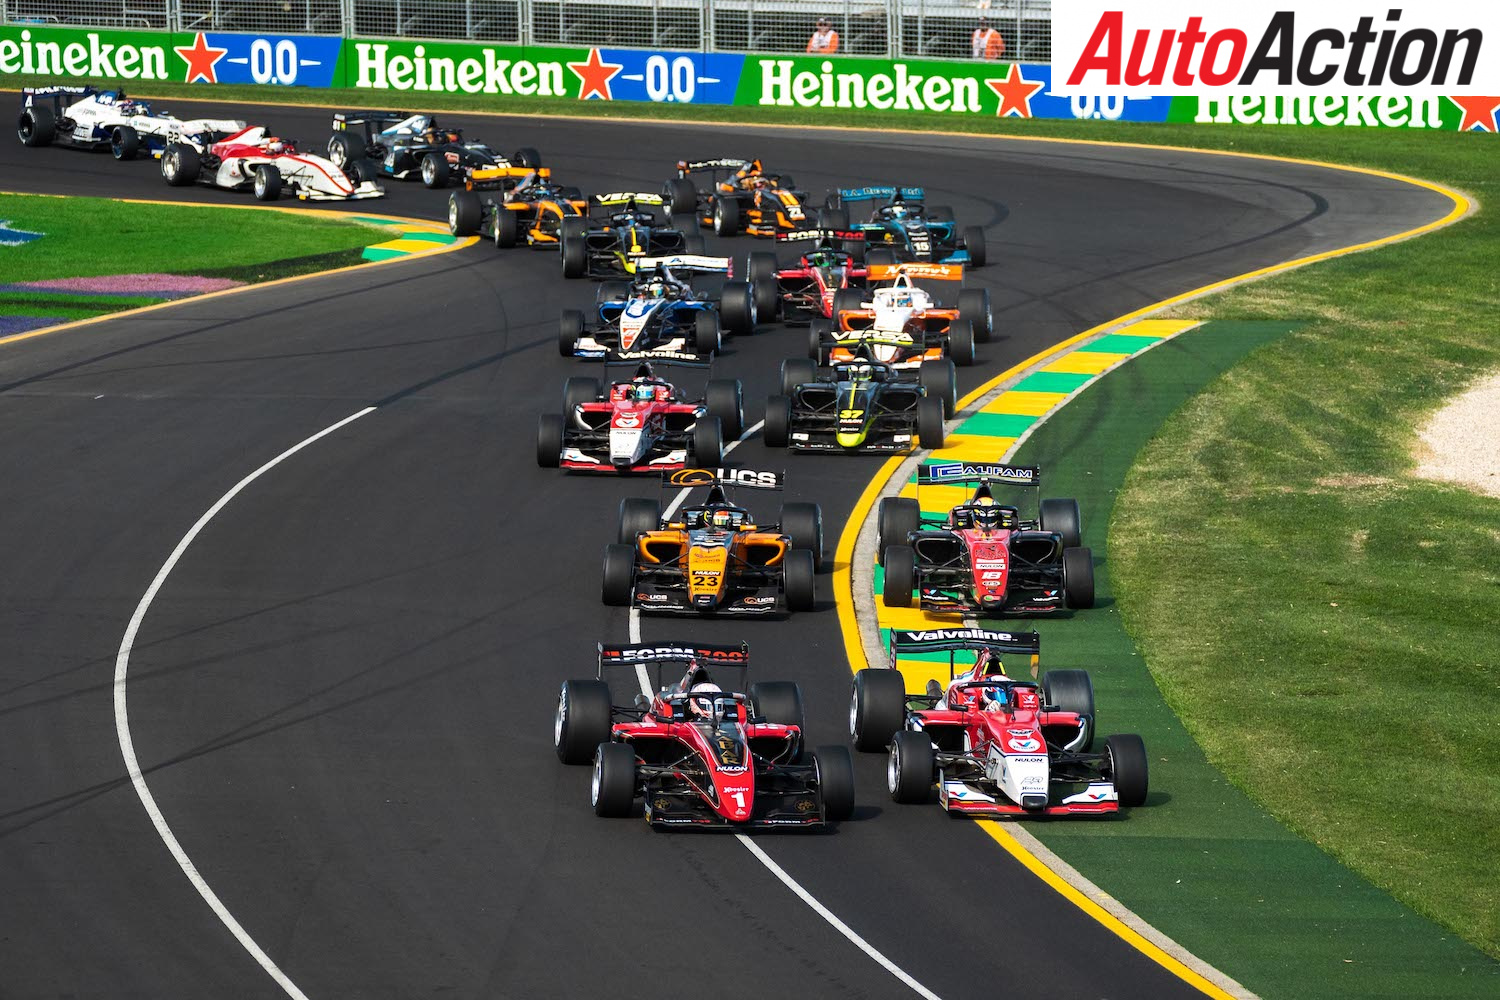 Drivers racing S5000 cars competed for the Australian Drivers Championship for several years.